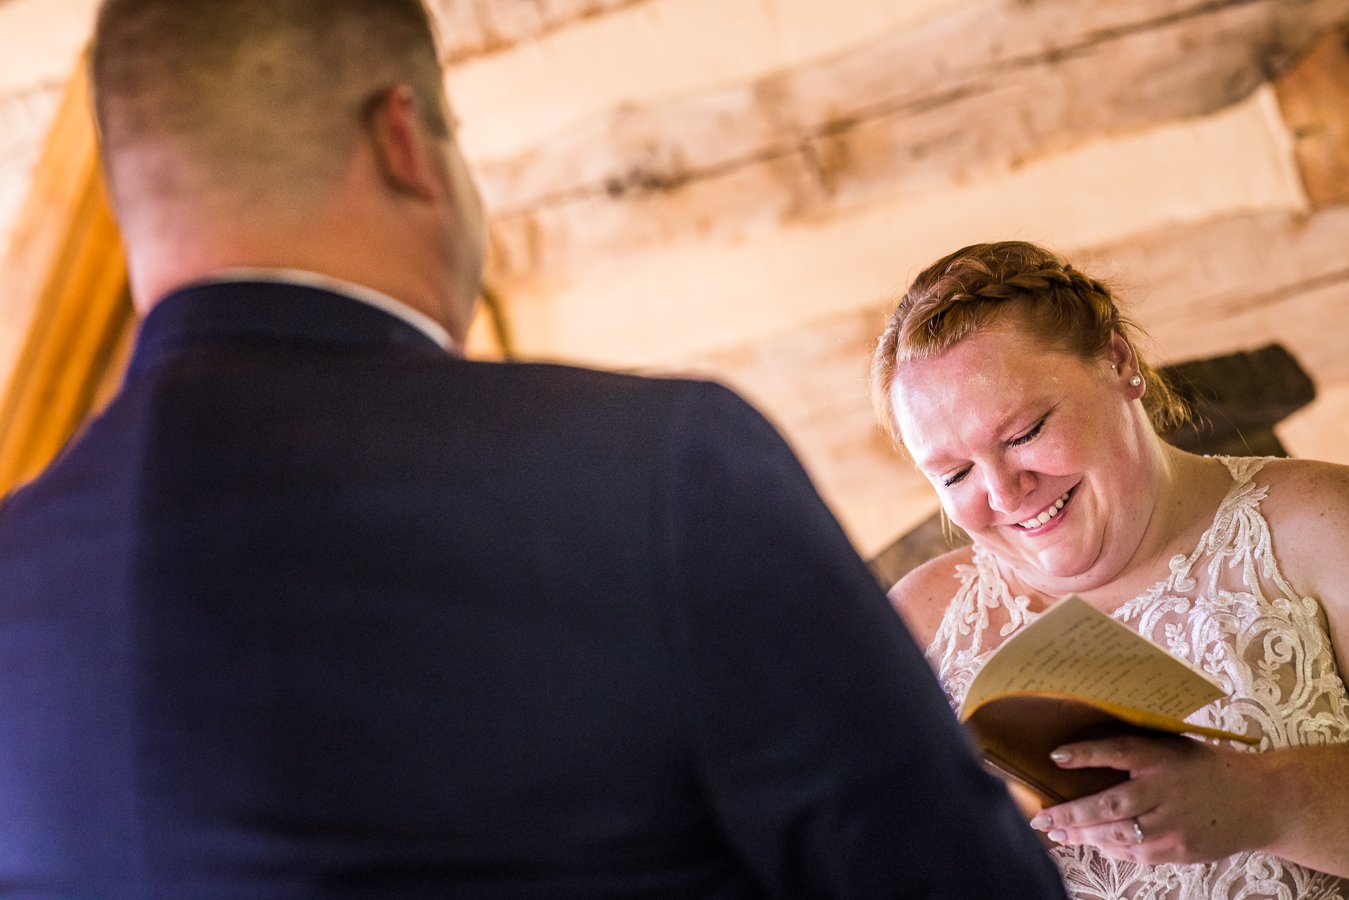 emotional moment between the bride and groom as they share their vows with one another during their wedding ceremony inside of the intimate xozy log chapel in stahlstown, pa 